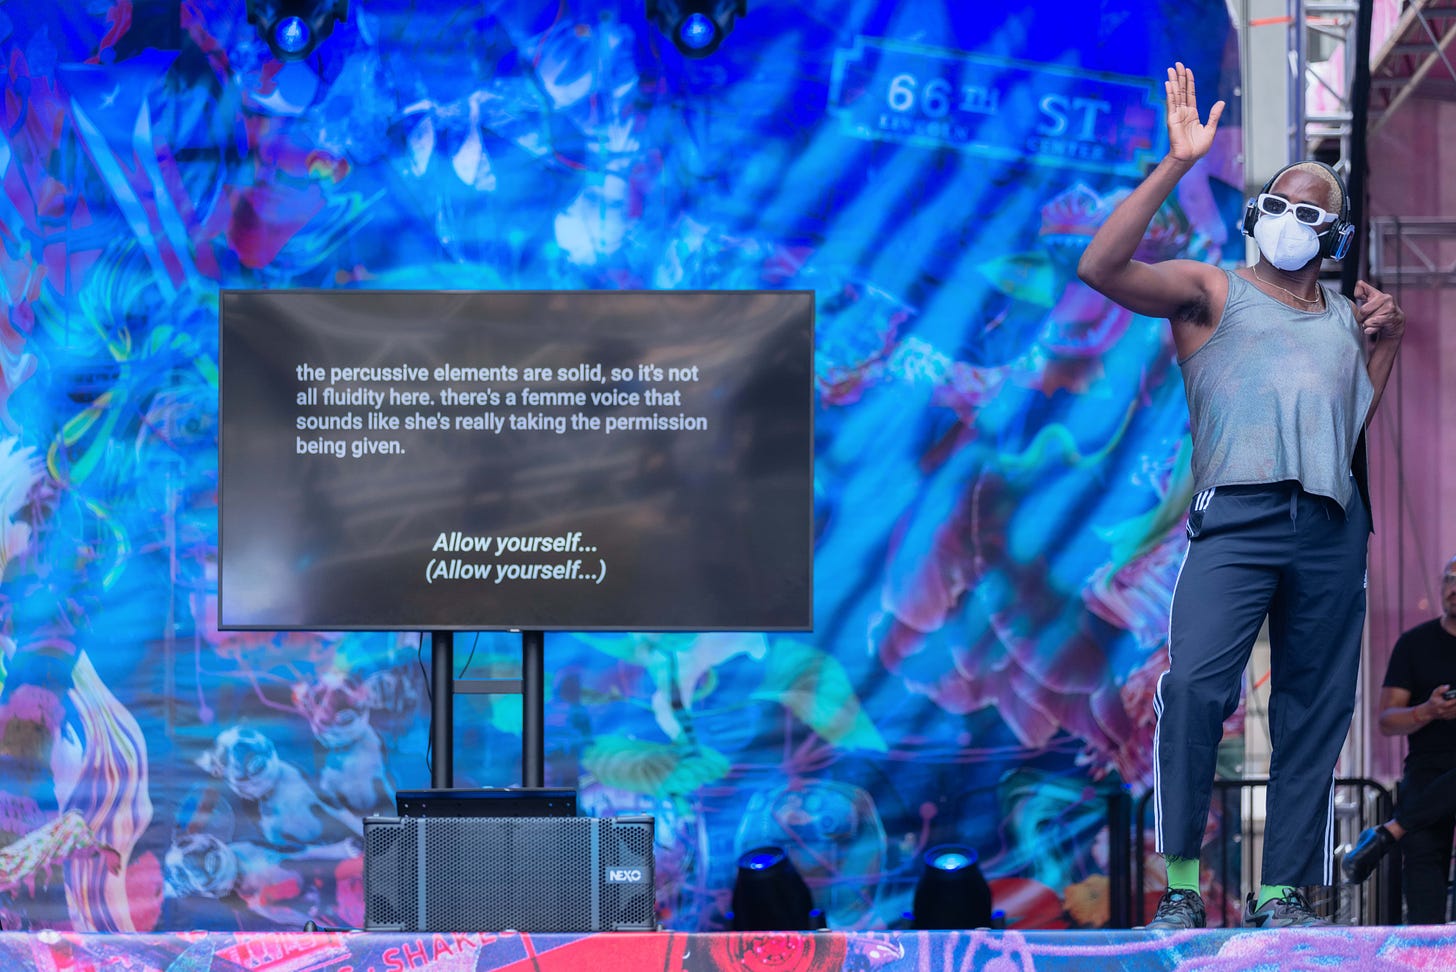 On a stage against a blue backdrop, there is a large TV screen showing two kinds of captions. One describes the aesthetics of a song: “the percussive elements are solid, so it’s not all fluidity here. there’s a femme voice that sounds like she’s really taking the permission being given.” Before, captions of the lyrics: “Allow yourself… (Allow yourself…)” Next to the monitor is Jerron Herman, a dancing disabled Black man wearing chic club attire, white sunglasses, a white KN95 mask, and headphones.